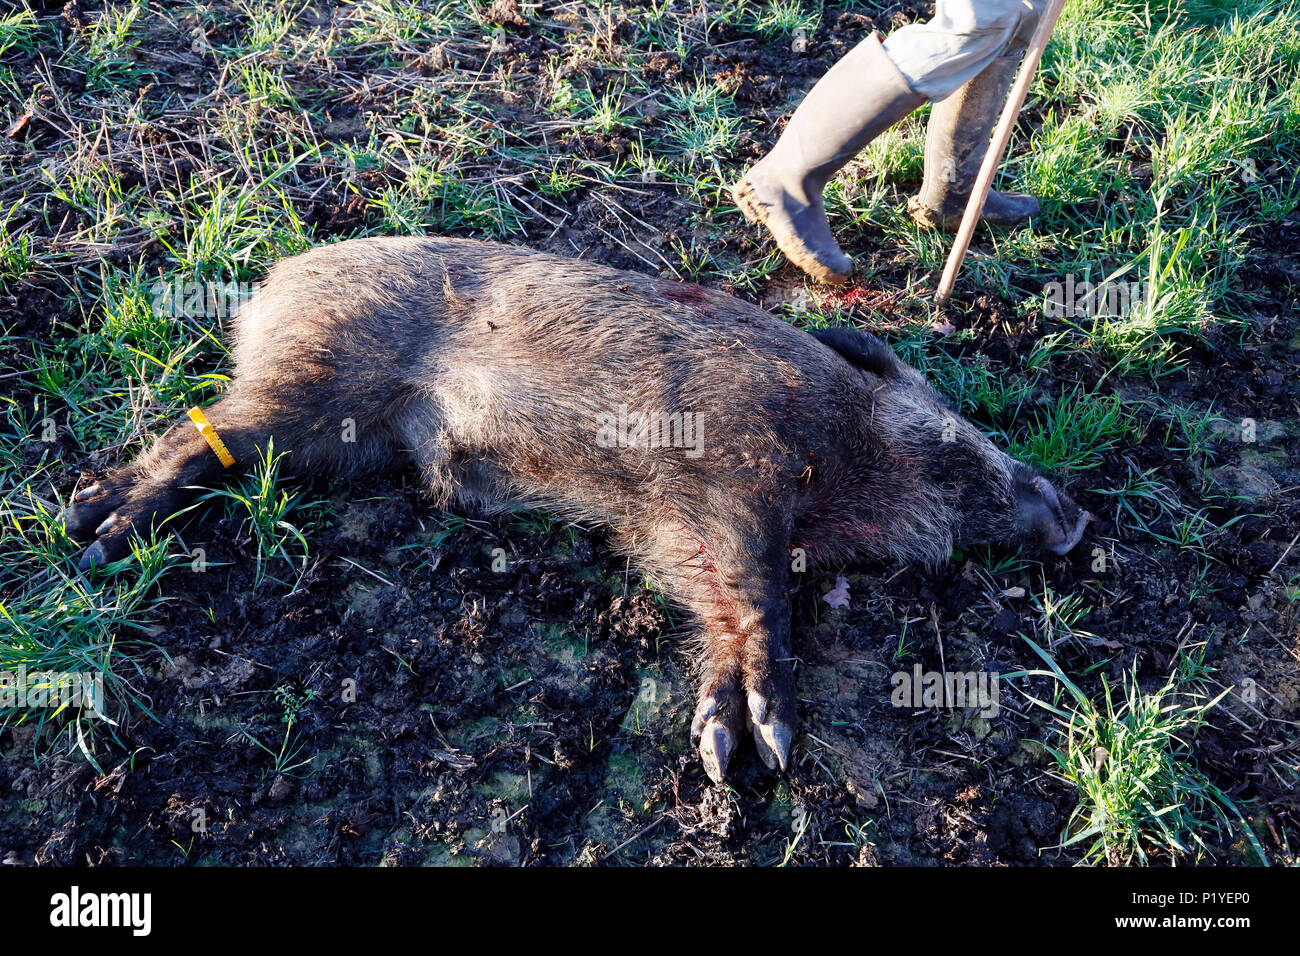 Department of Aisne. Big game hunting season (autumn). Boar shot and ringed. Stock Photo